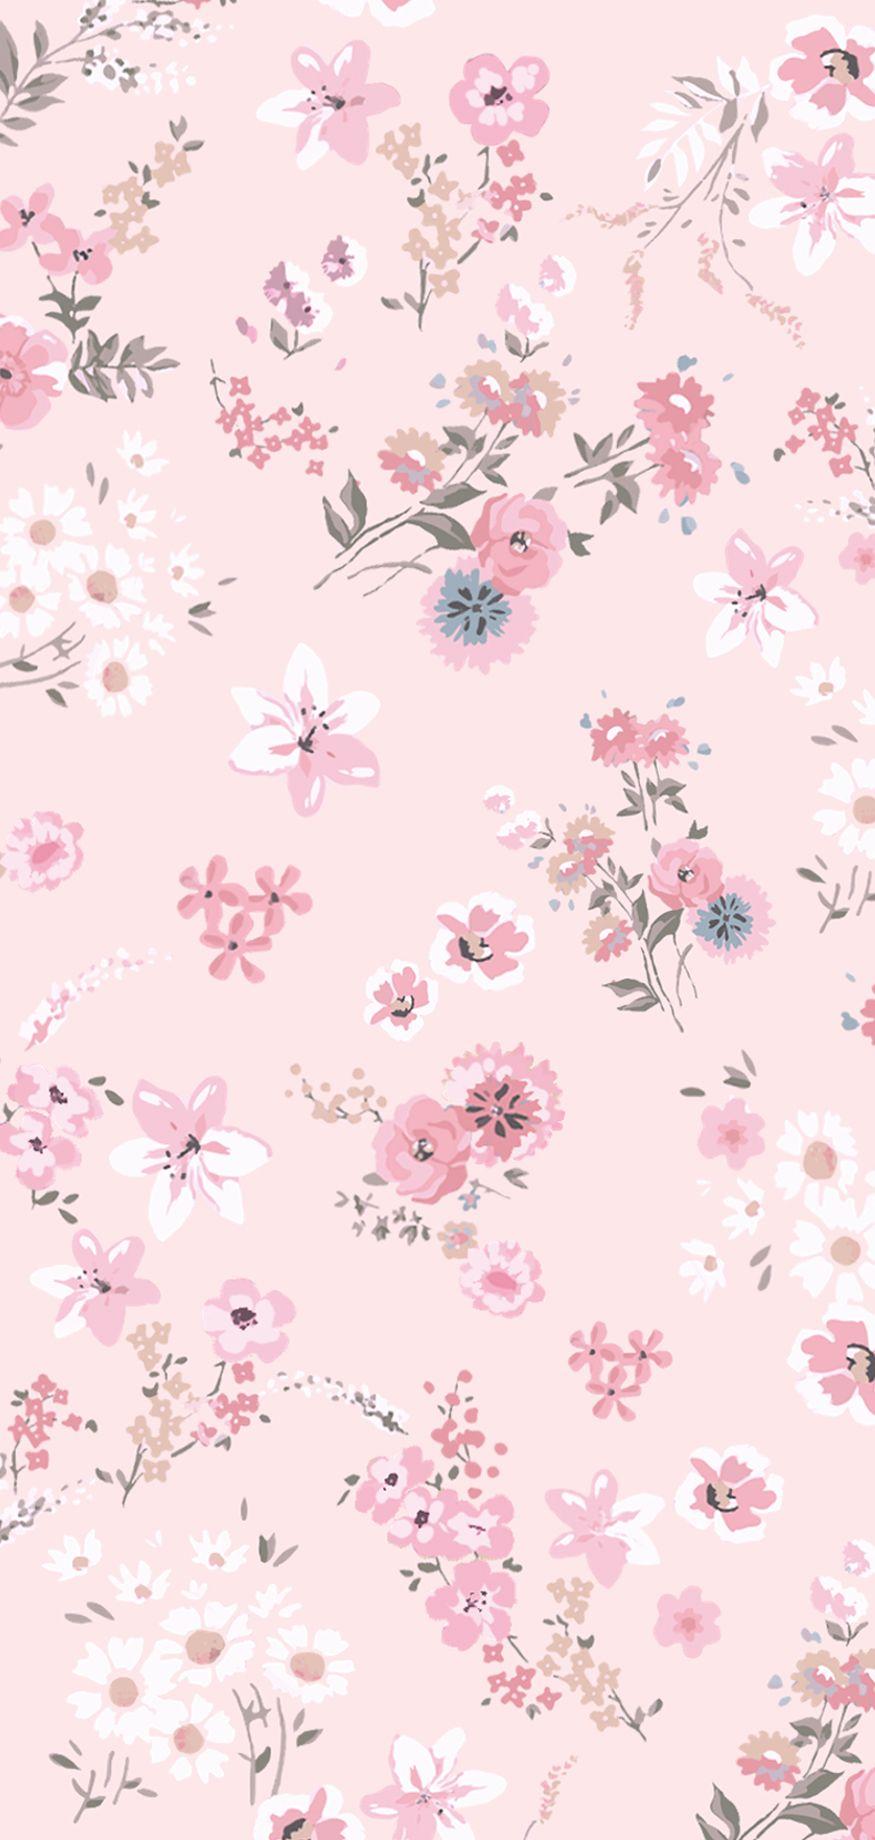 Tiny Flowers. Pastel iphone wallpaper, Floral wallpaper iphone, Pink wallpaper iphone